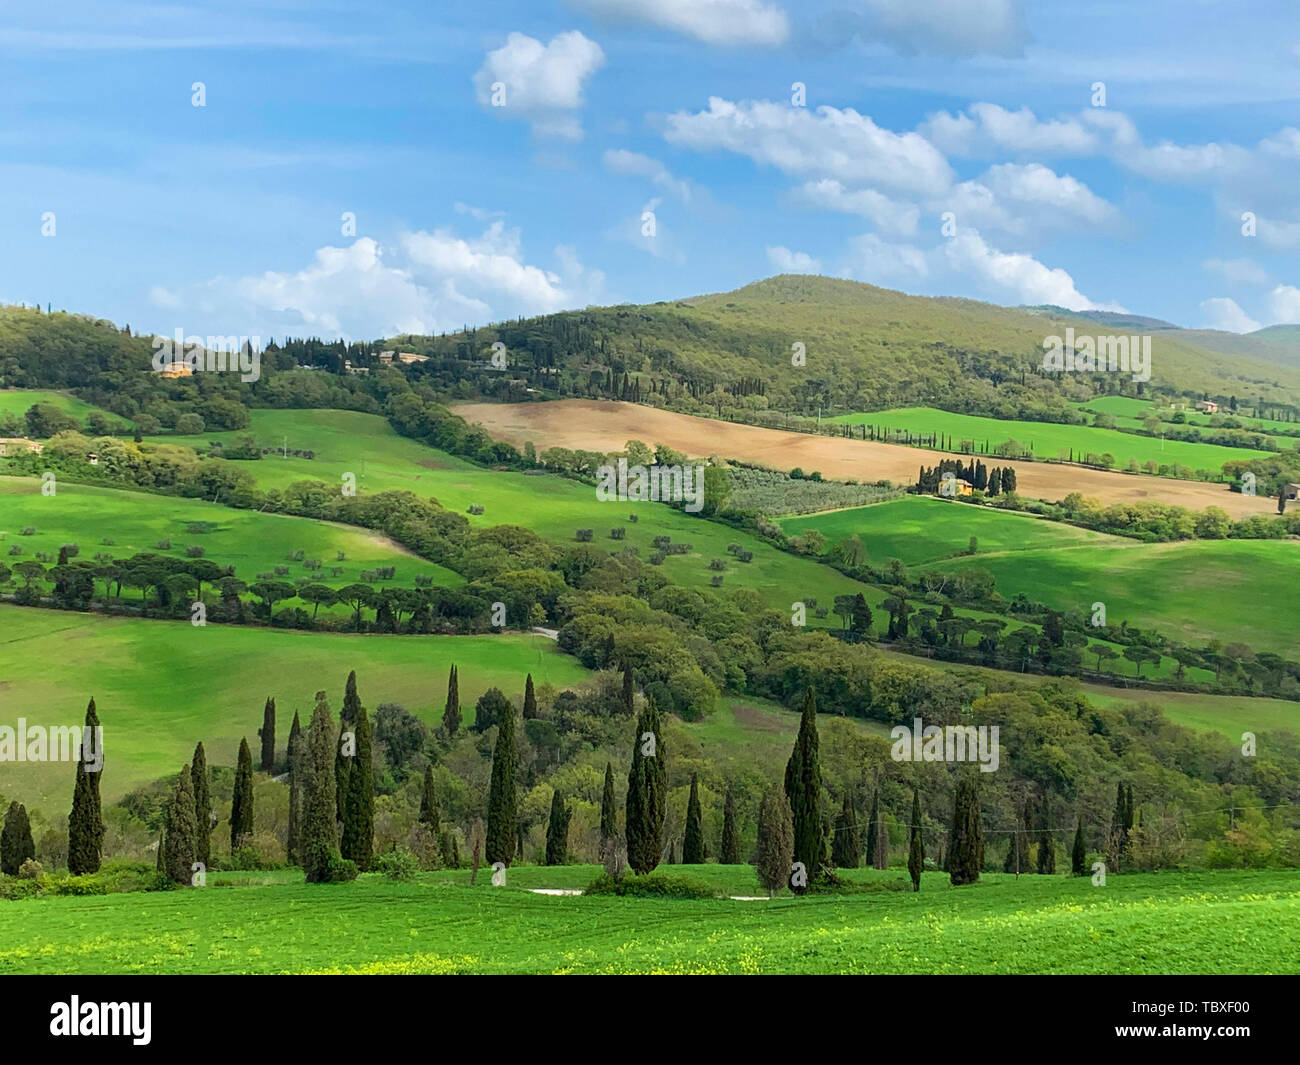 Landscape in spring. Sinuous gorgeous green hills in a sunny day. Stock Photo